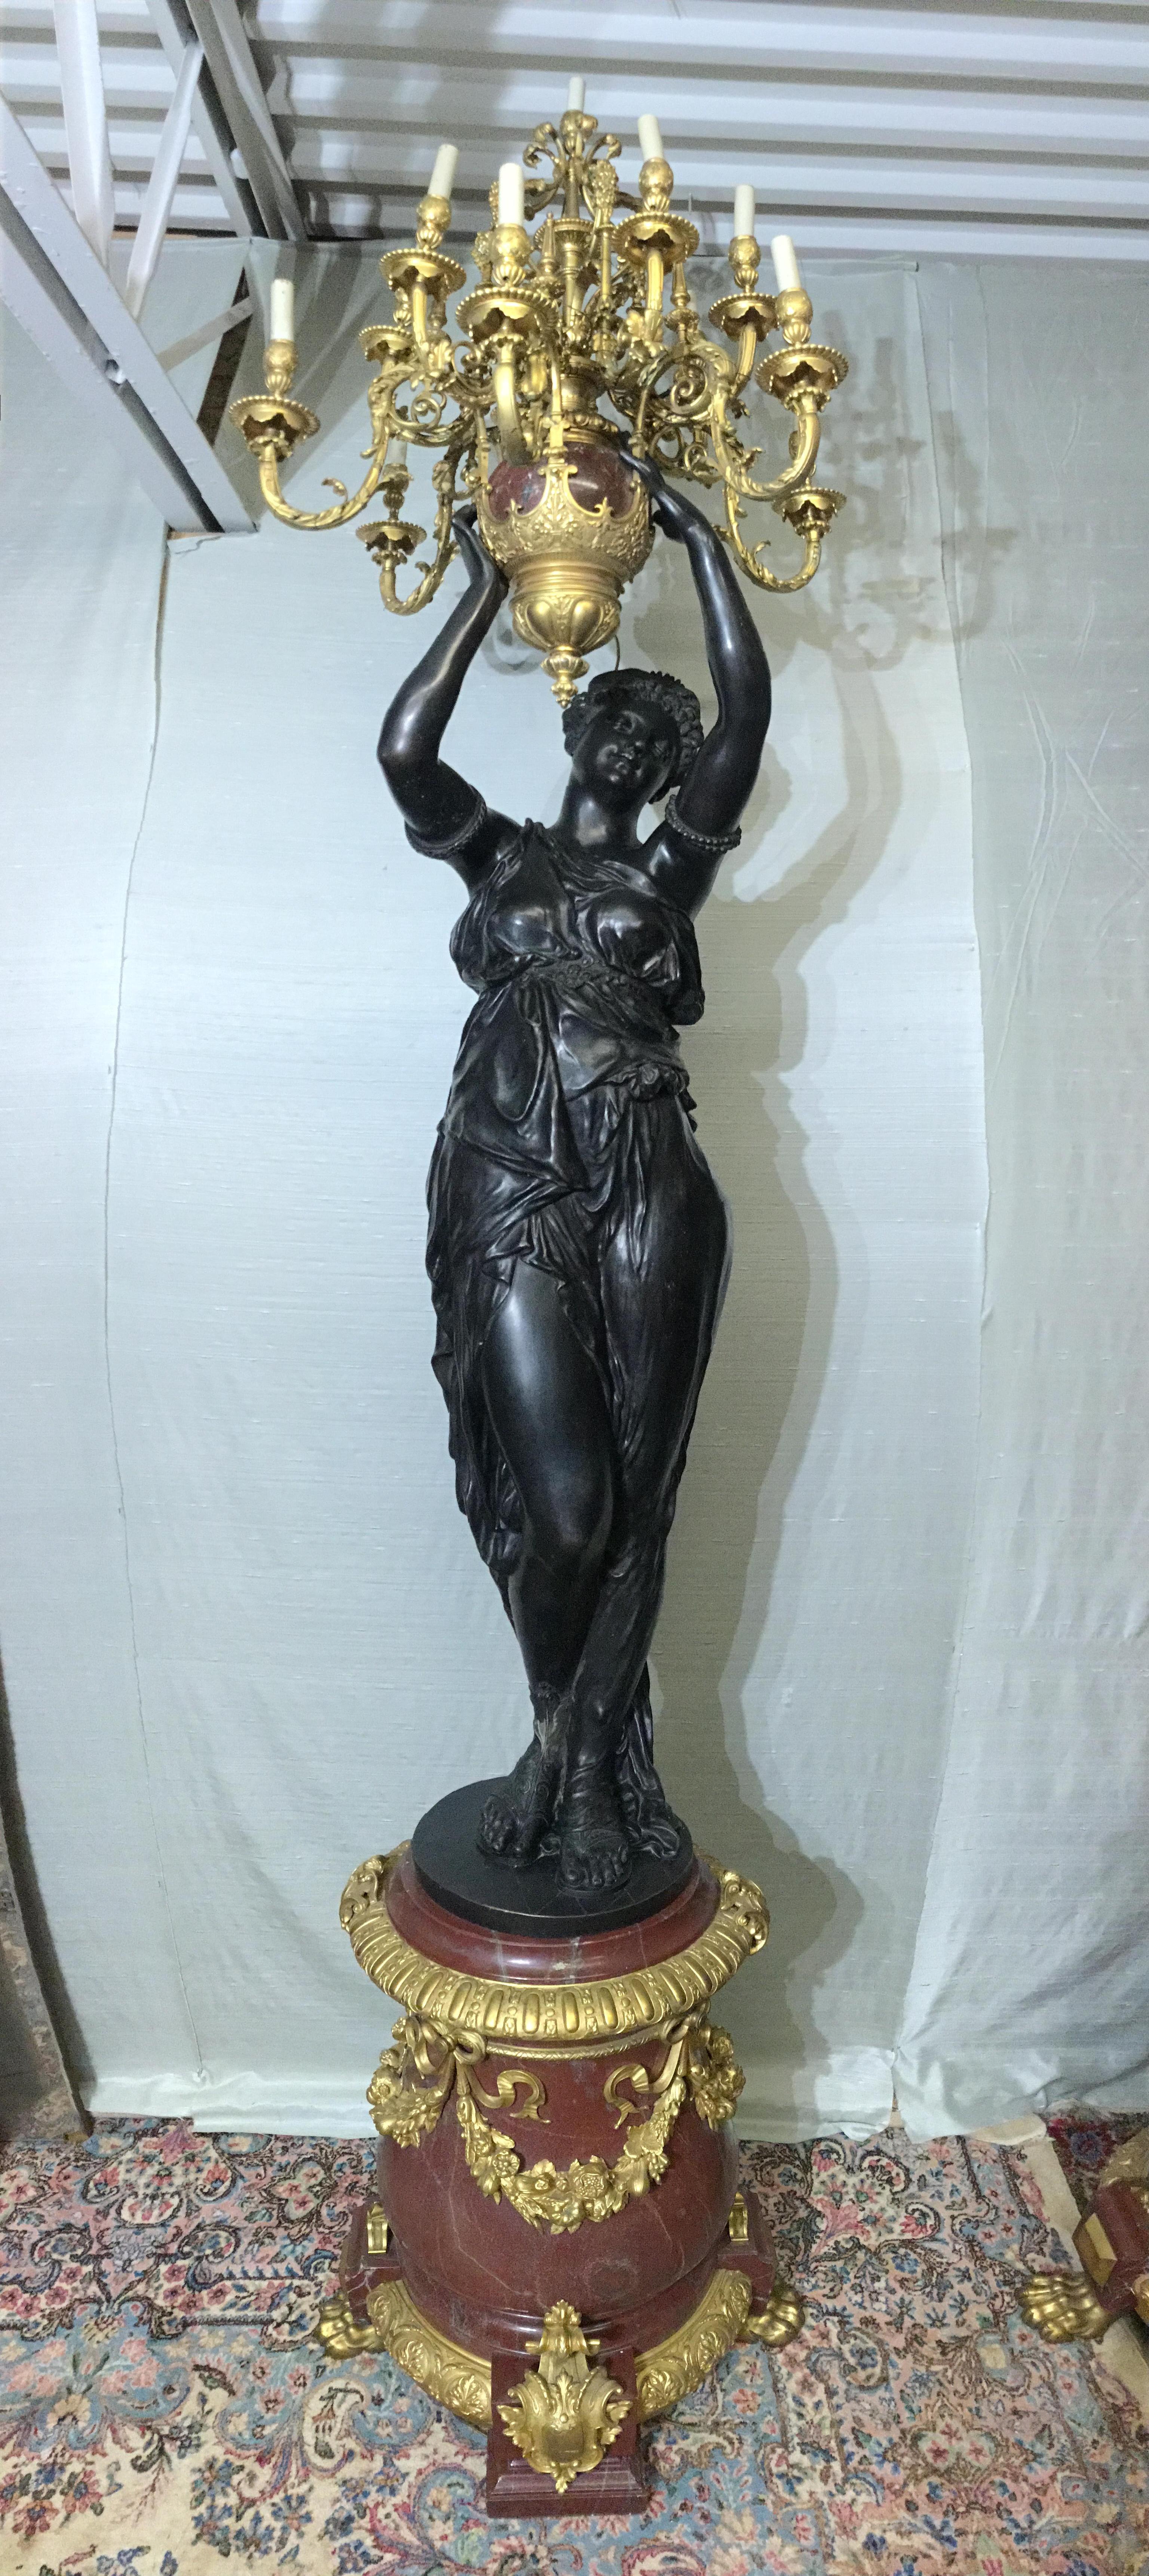 A large pair of French early 20th century patinated bronze and Rouge Griotte marble after Albert-Ernest Carrier-Belleuse (1824-1887), Paris each standing classically draped female figure holding aloft an urn issuing scrolling acanthus branches, each